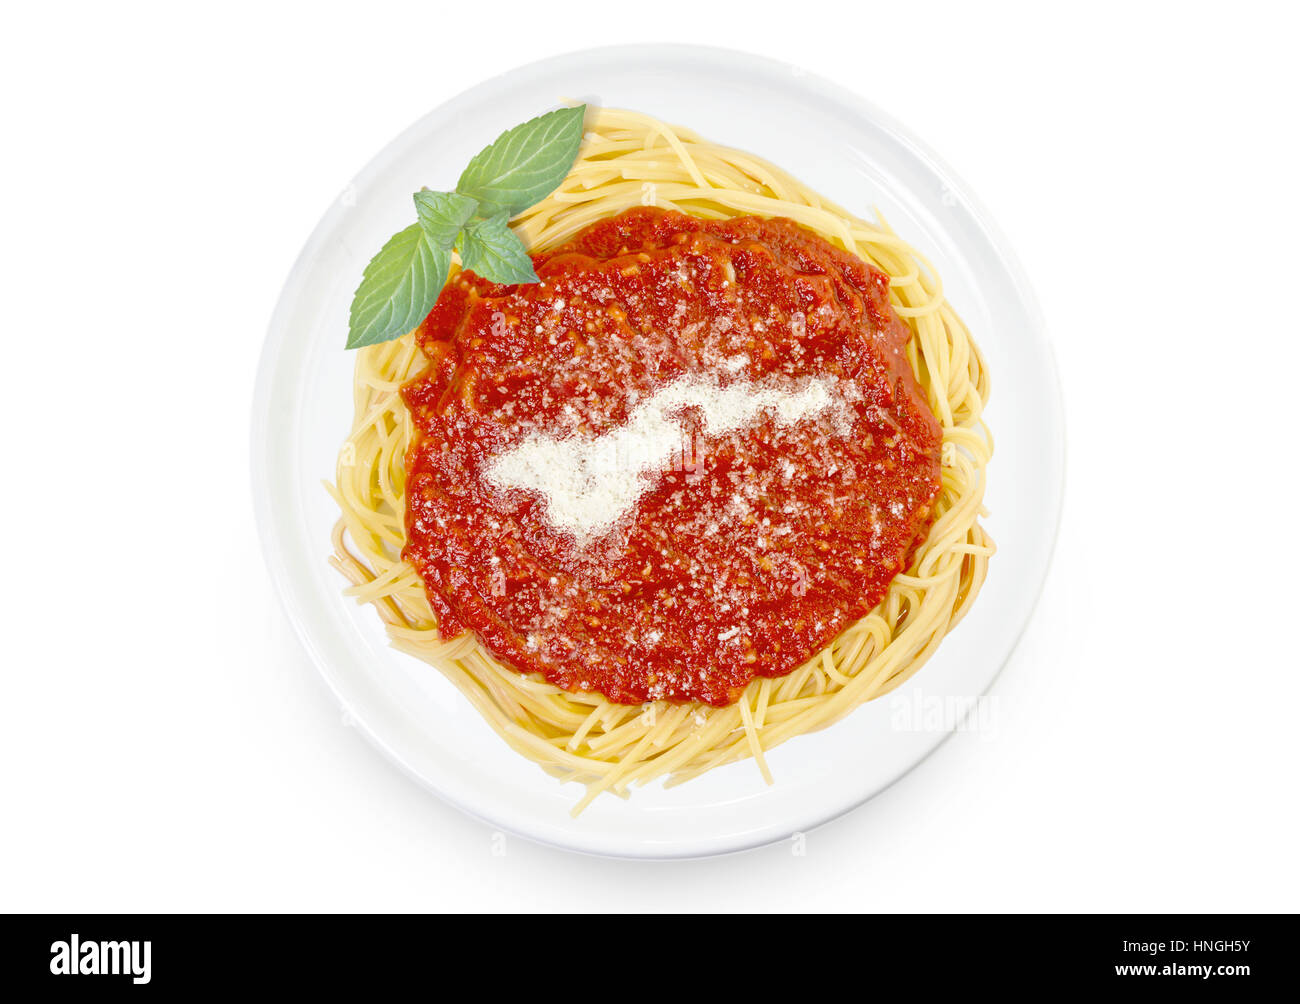 Freshly cooked dish of tasty pasta with tomato sauce and parmesan cheese in the shape of American Samoa .(series) Stock Photo